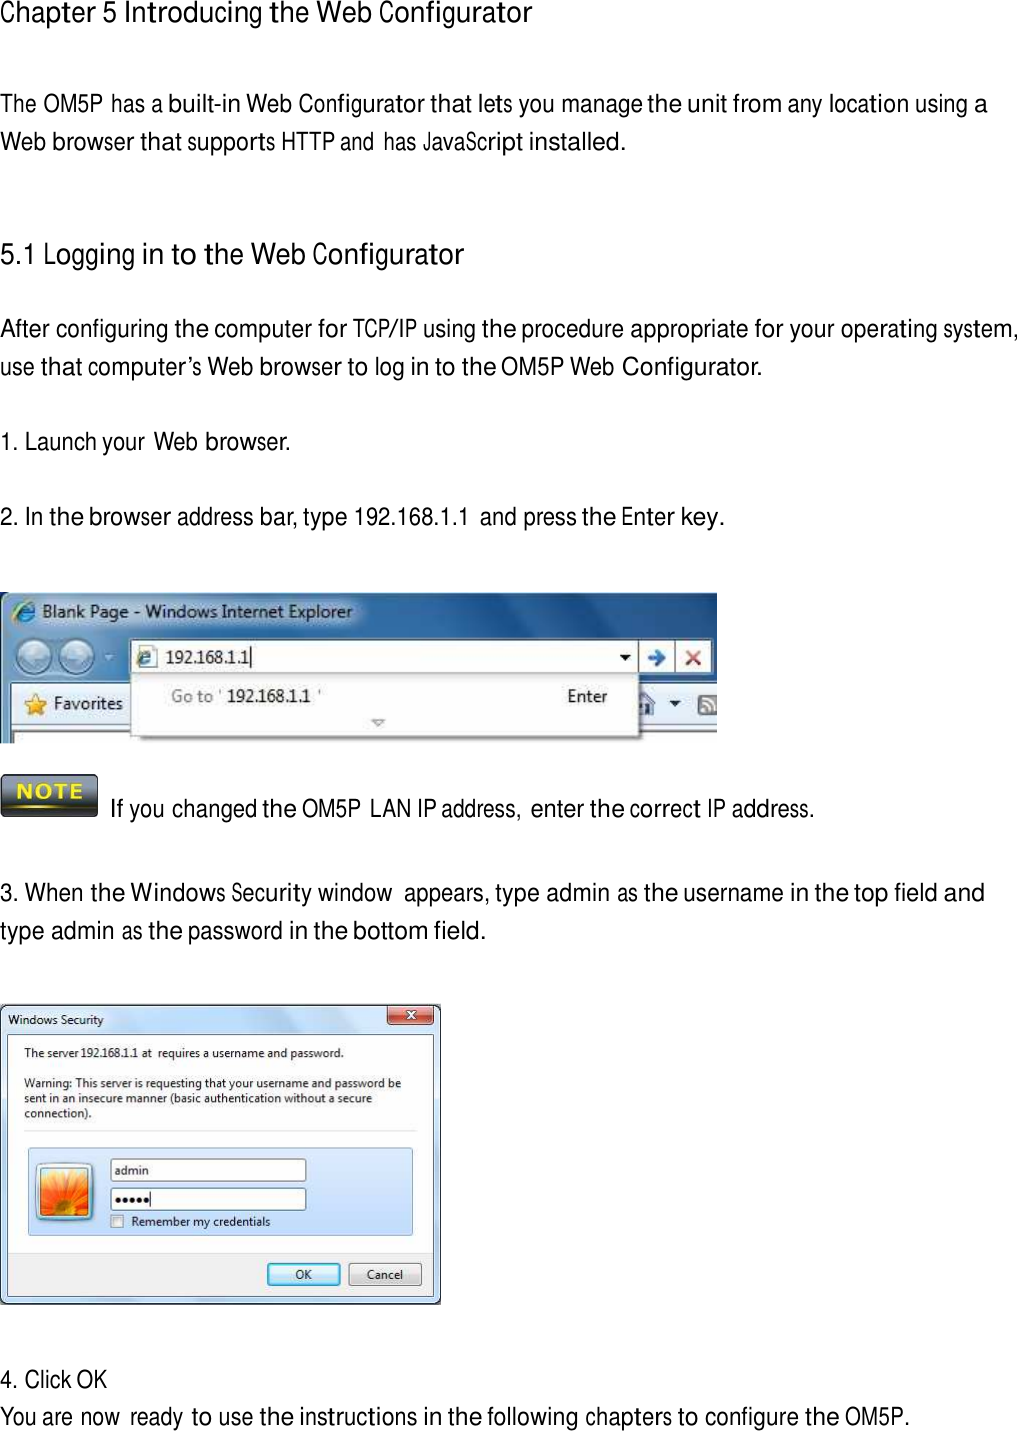 Chapter 5 Introducing the Web Configurator     The OM5P has a built-in Web Configurator that lets you manage the unit from any location using a Web browser that supports HTTP and  has JavaScript installed.     5.1 Logging in to the Web Configurator   After configuring the computer for TCP/IP using the procedure appropriate for your operating system, use that computer’s Web browser to log in to the OM5P Web Configurator.   1. Launch your Web browser.   2. In the browser address bar, type 192.168.1.1  and press the Enter key.       If you changed the OM5P LAN IP address, enter the correct IP address.    3. When the Windows Security window  appears, type admin as the username in the top field and type admin as the password in the bottom field.        4. Click OK You are now  ready to use the instructions in the following chapters to configure the OM5P. 